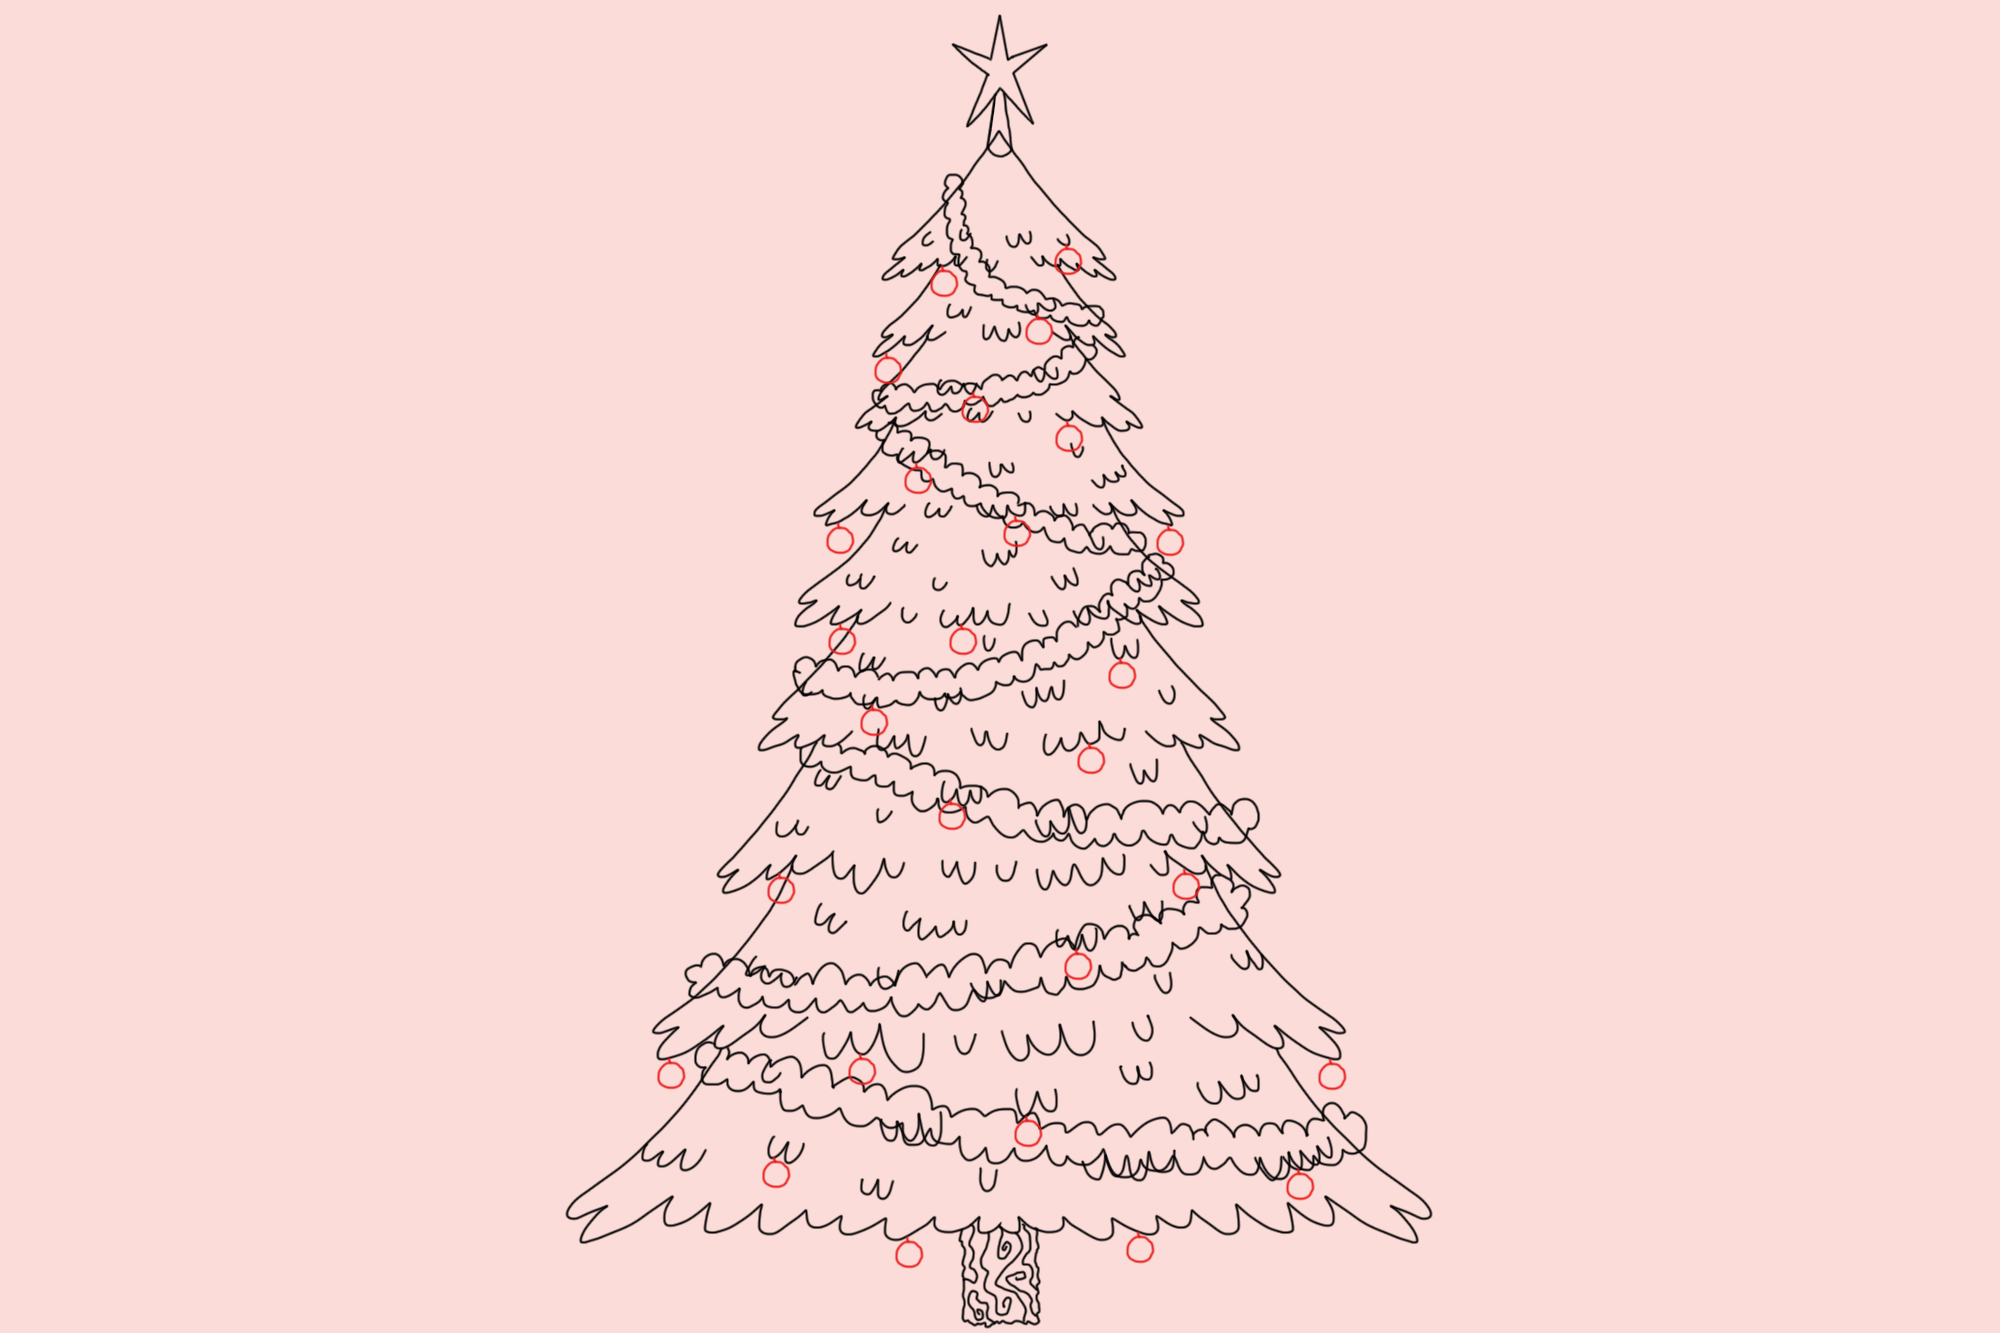 How To Draw A Christmas Tree: A Step By Step Guide | Thought Catalog